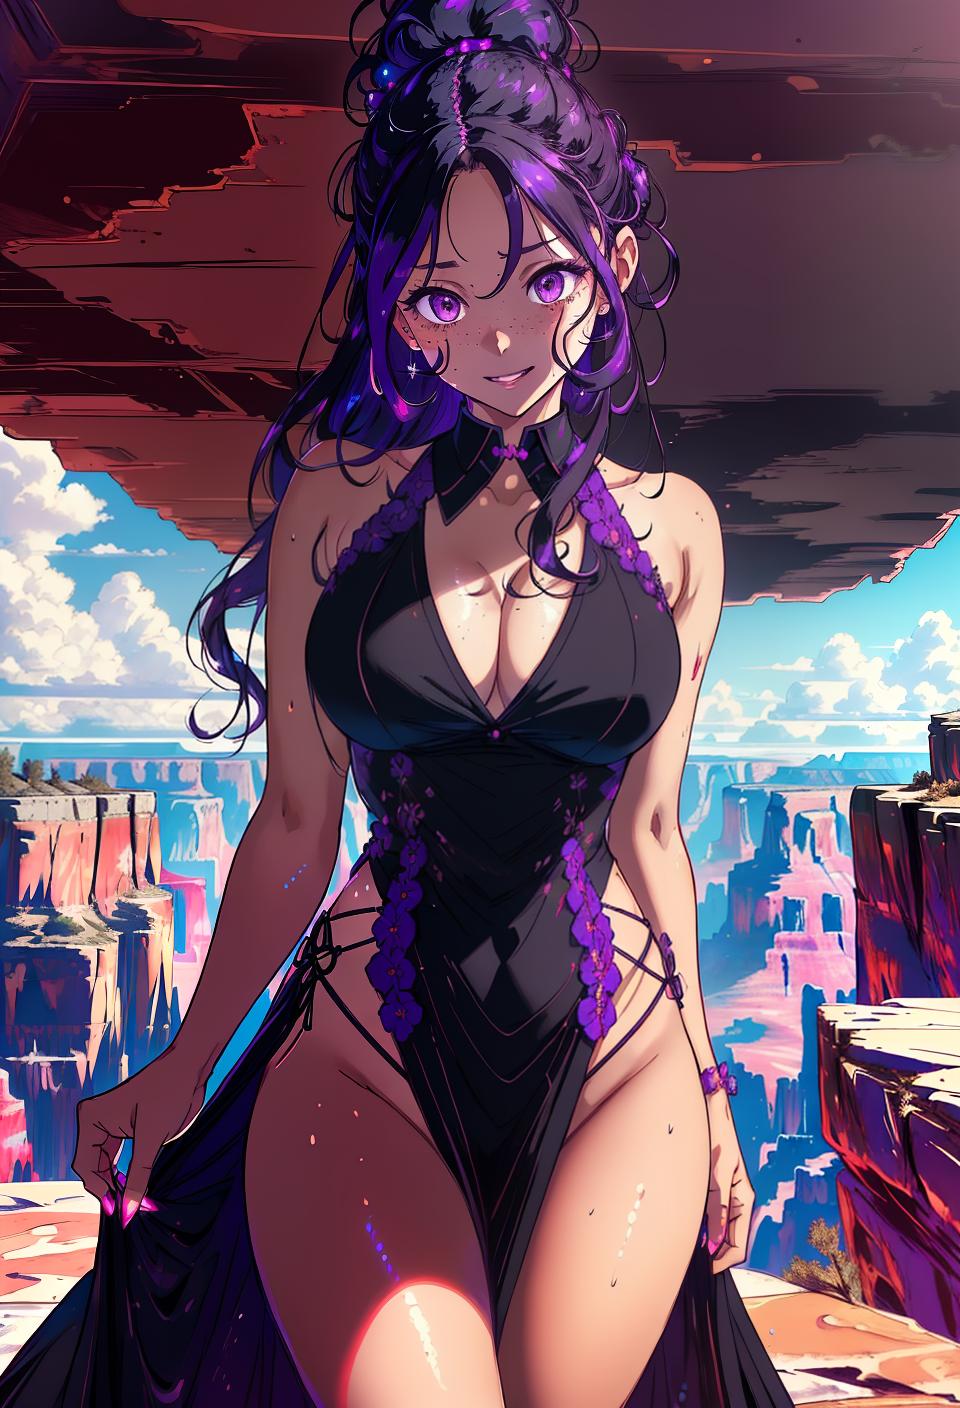  ((trending, highres, masterpiece, cinematic shot)), 1girl, young, female formal wear, Grand Canyon scene, very long curly black hair, hair in a bun, large purple eyes, calm personality, happy expression, freckles, tanned skin, morbid, energetic